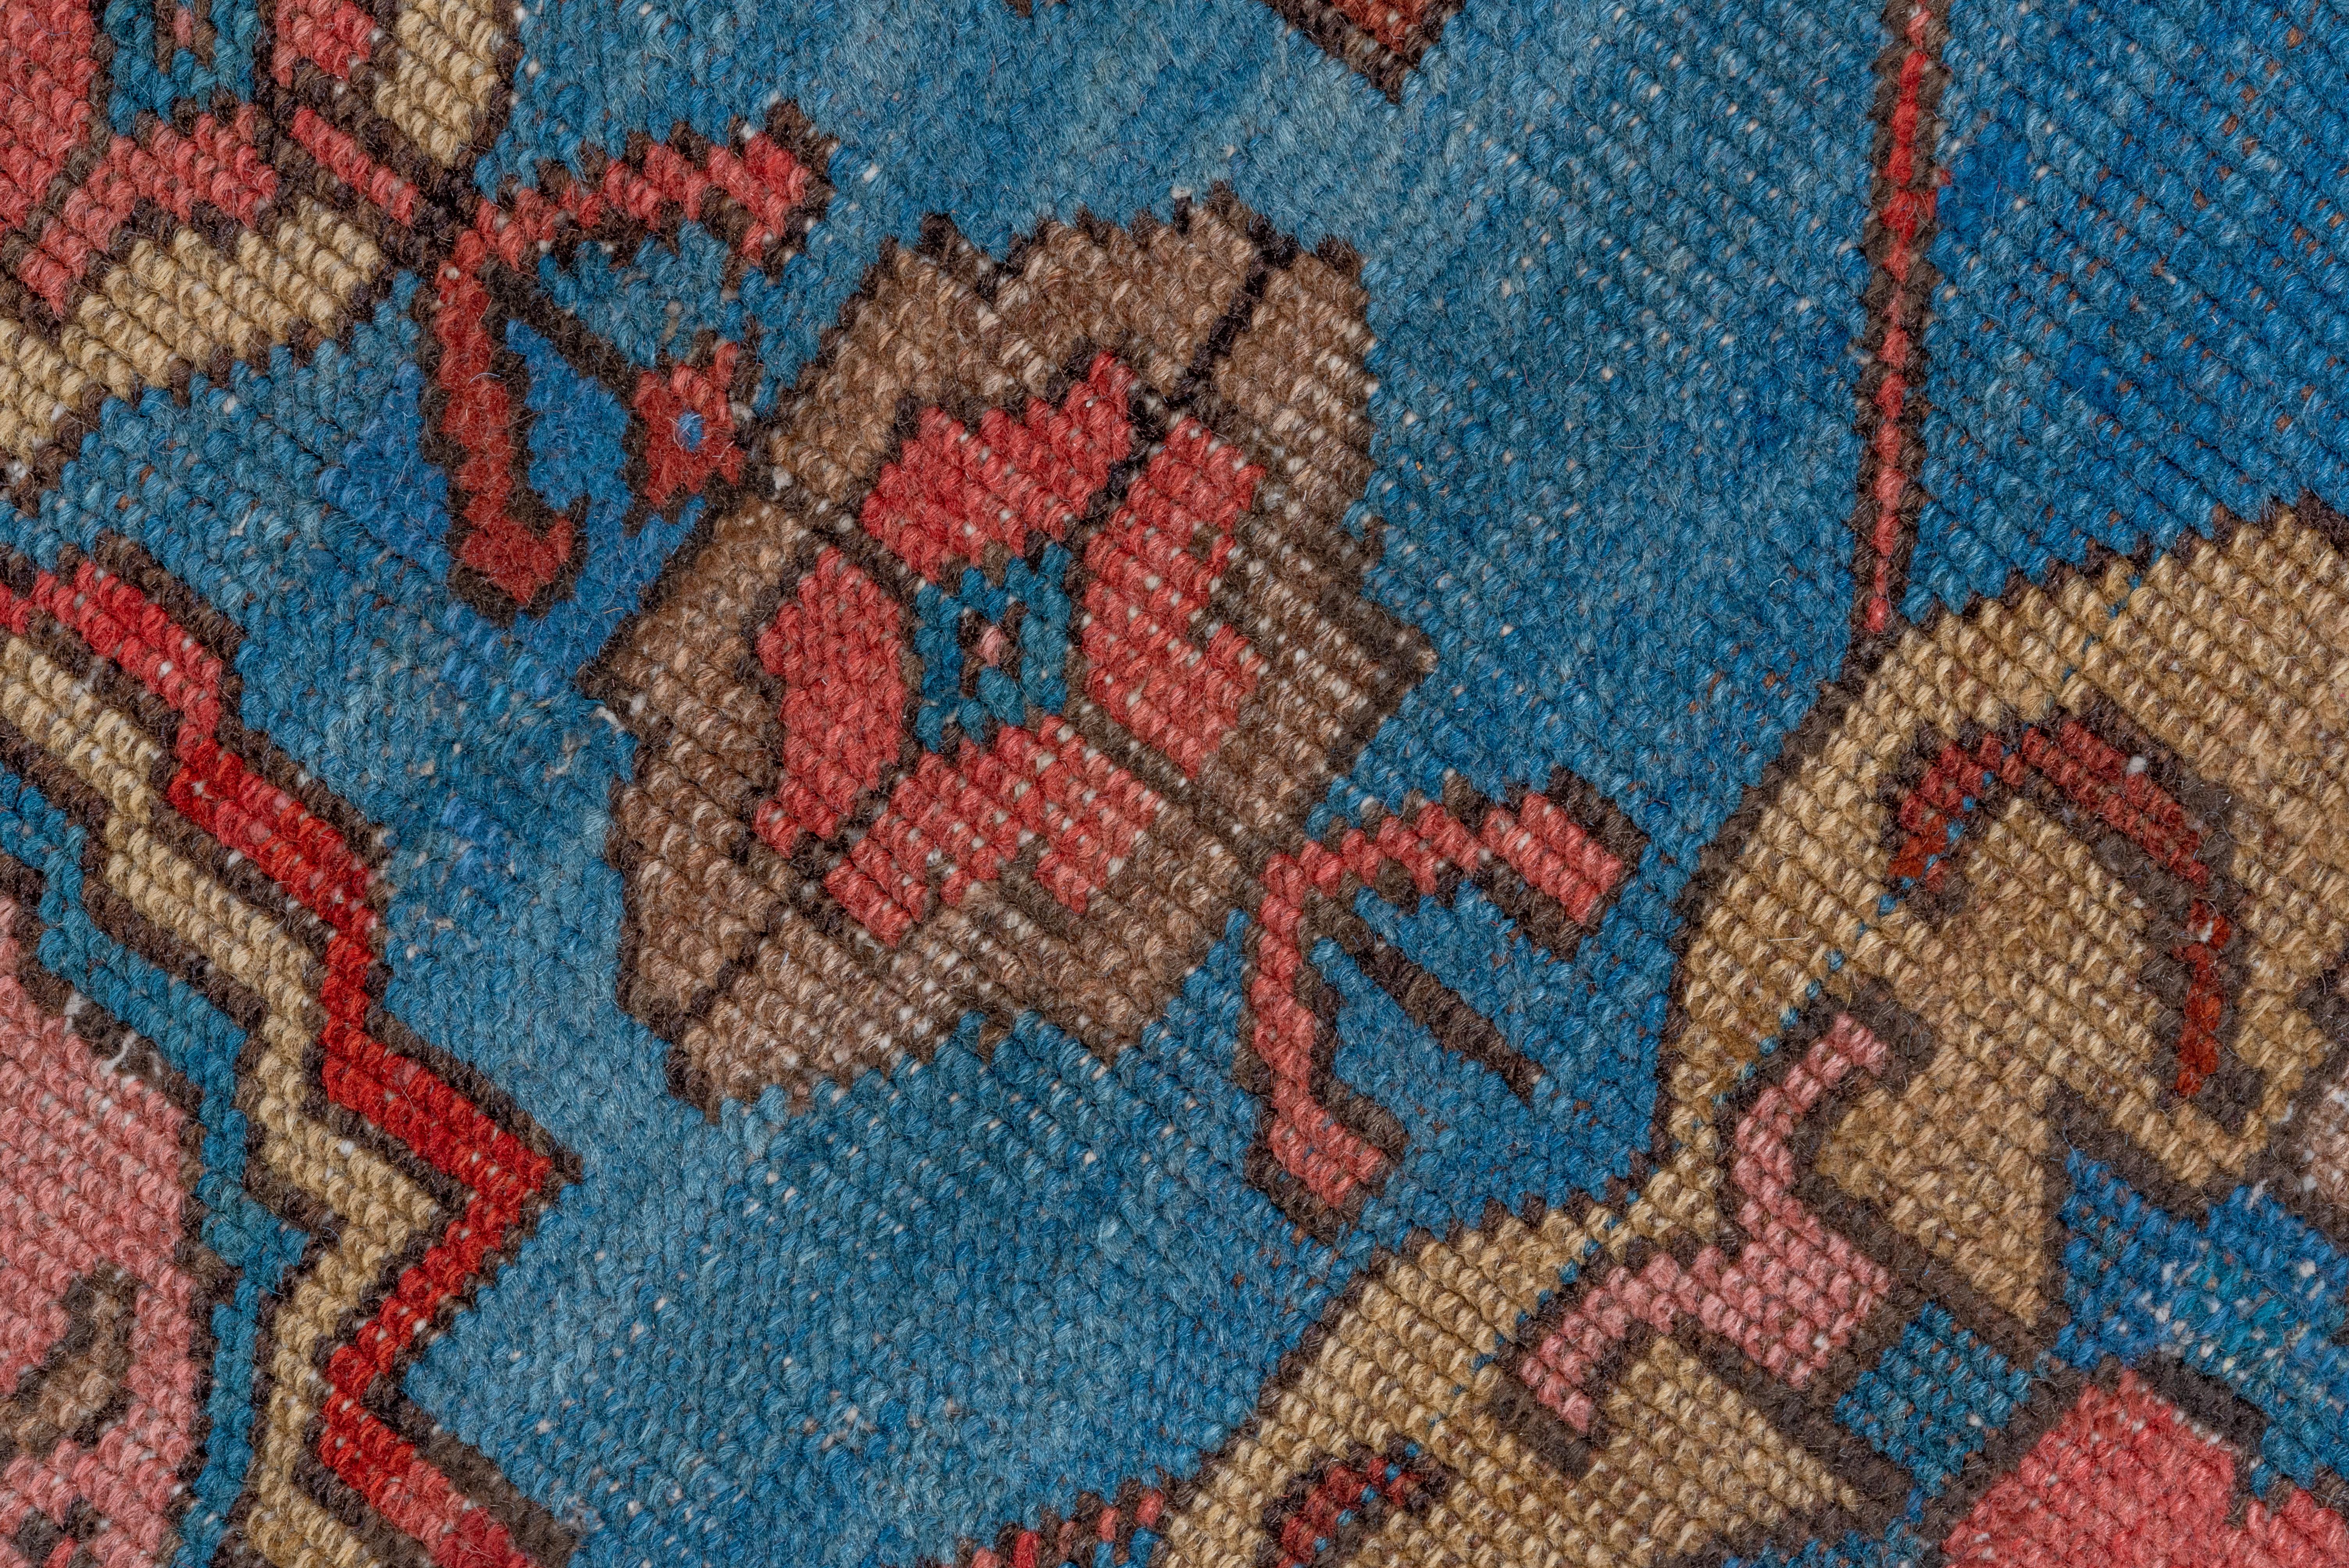 Wool Outsanding Colorful Antique Persian Bakhshayesh Carpet, Late 19th Century For Sale